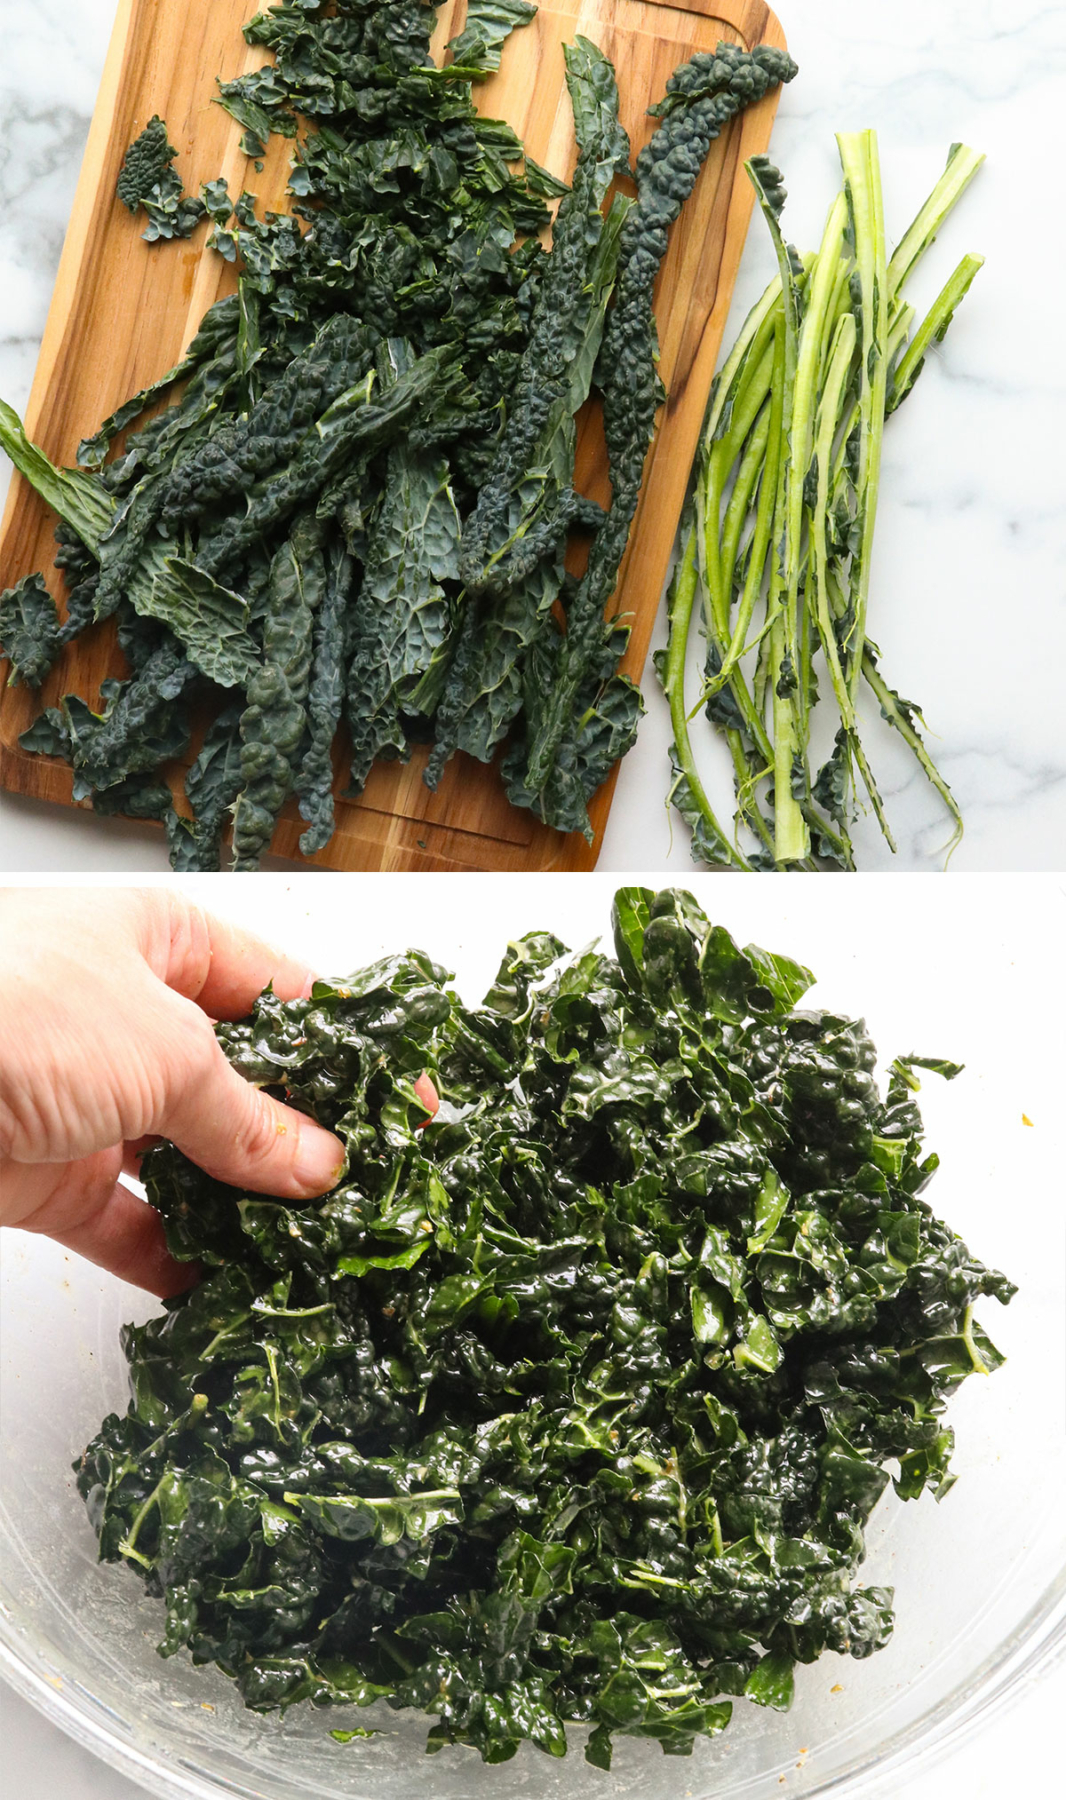 stems removed from kale and massaged in the bowl of dressing.